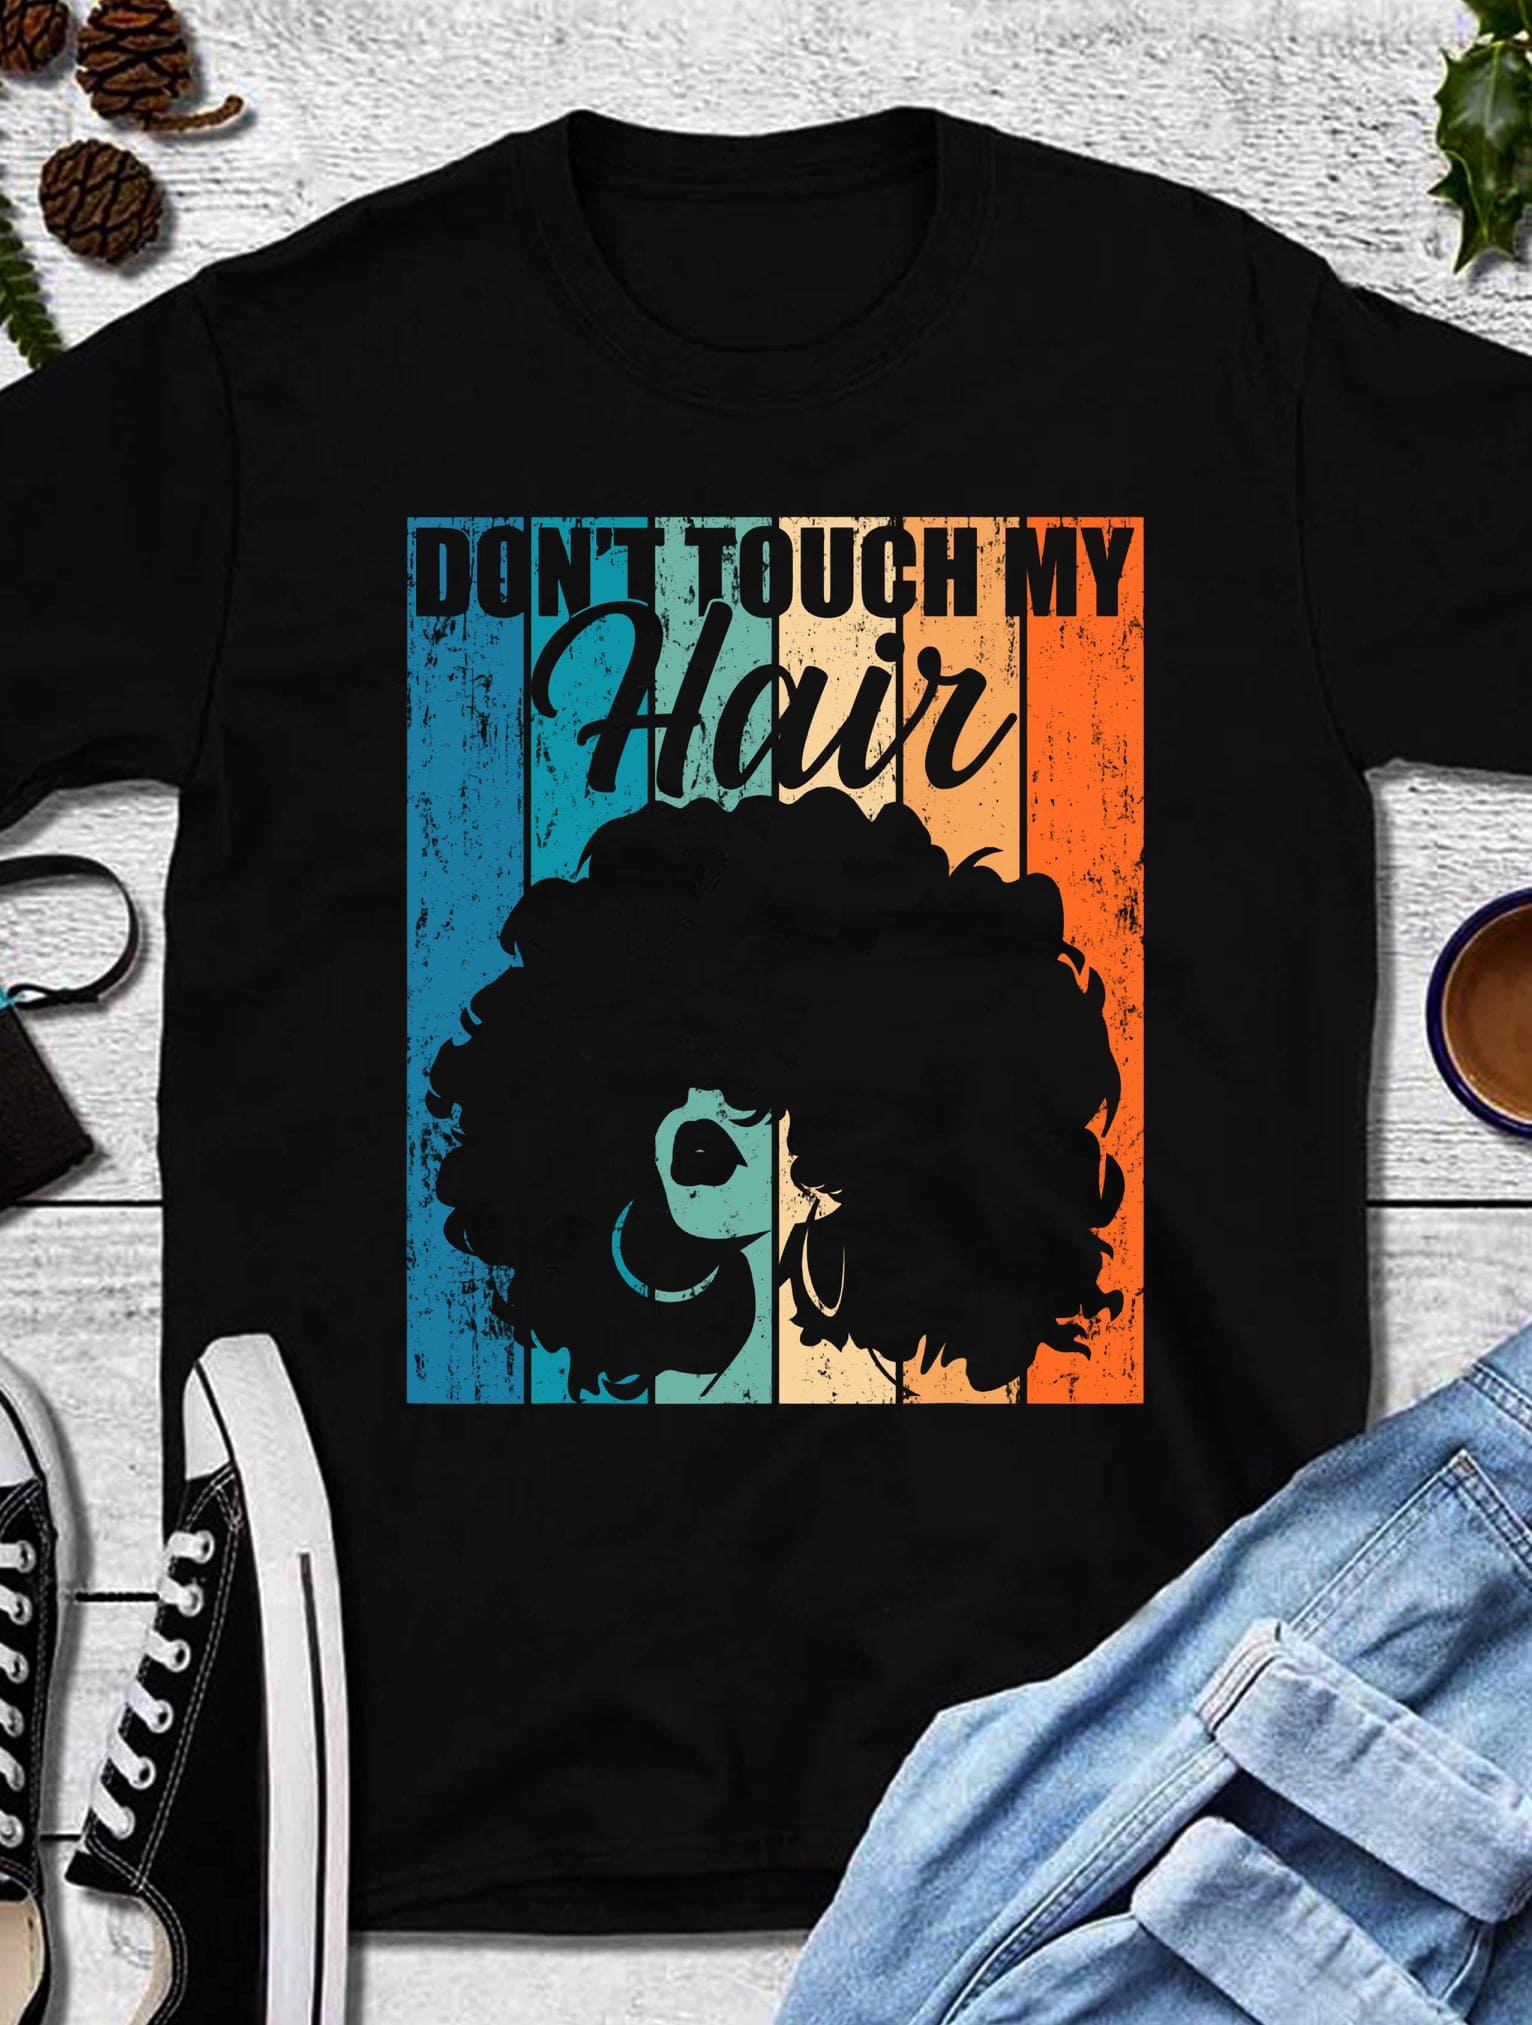 Don't touch my hair - Curly black hair, gift for black woman